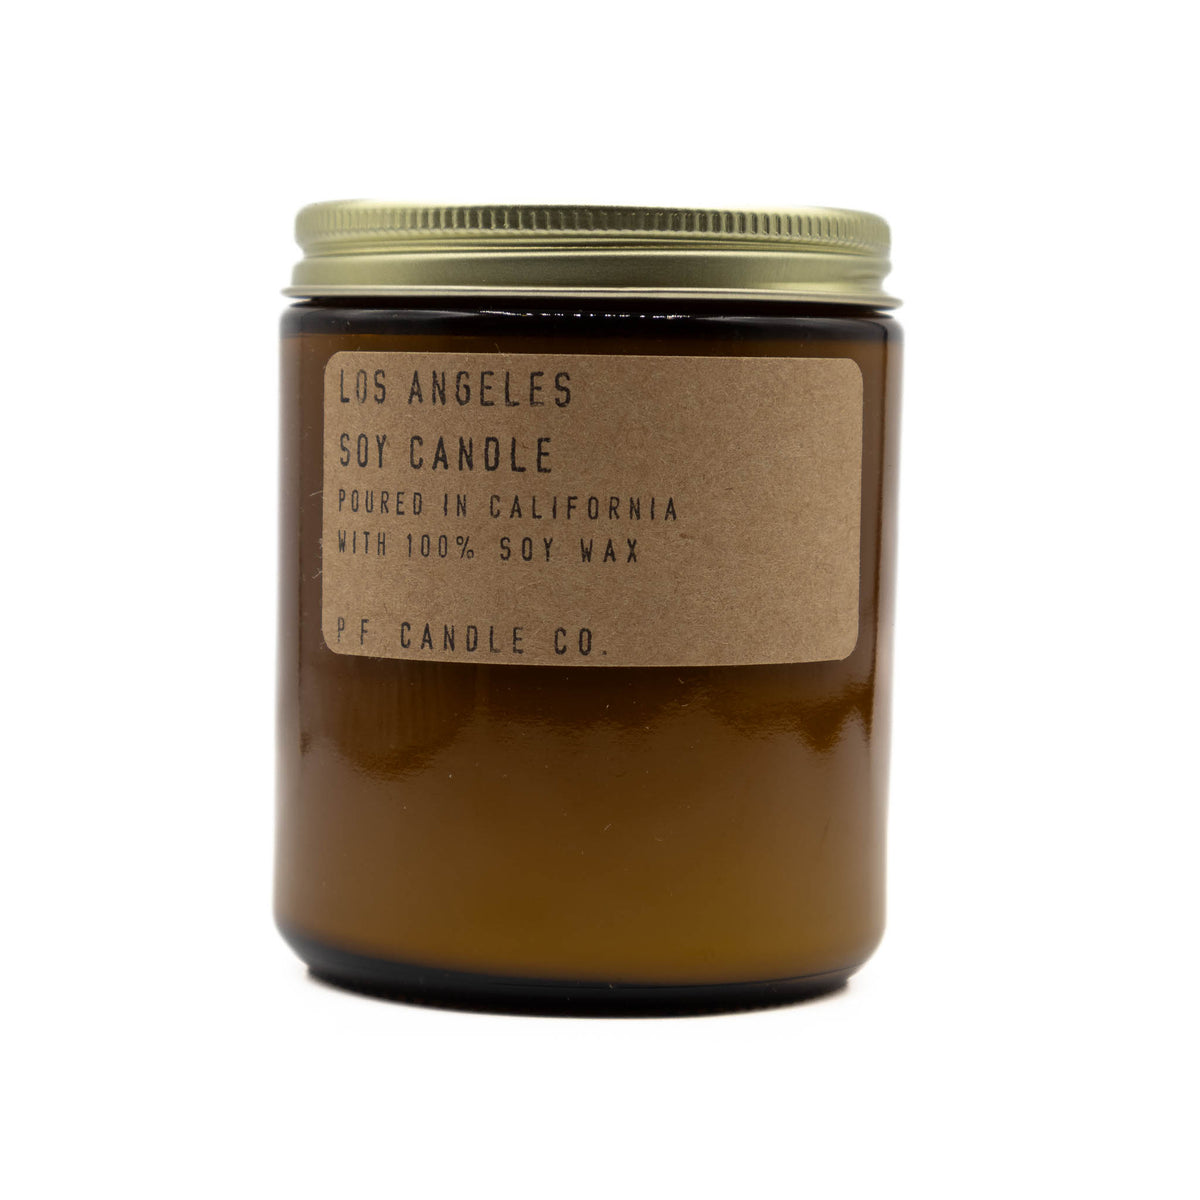 PF Candle Co Los Angeles